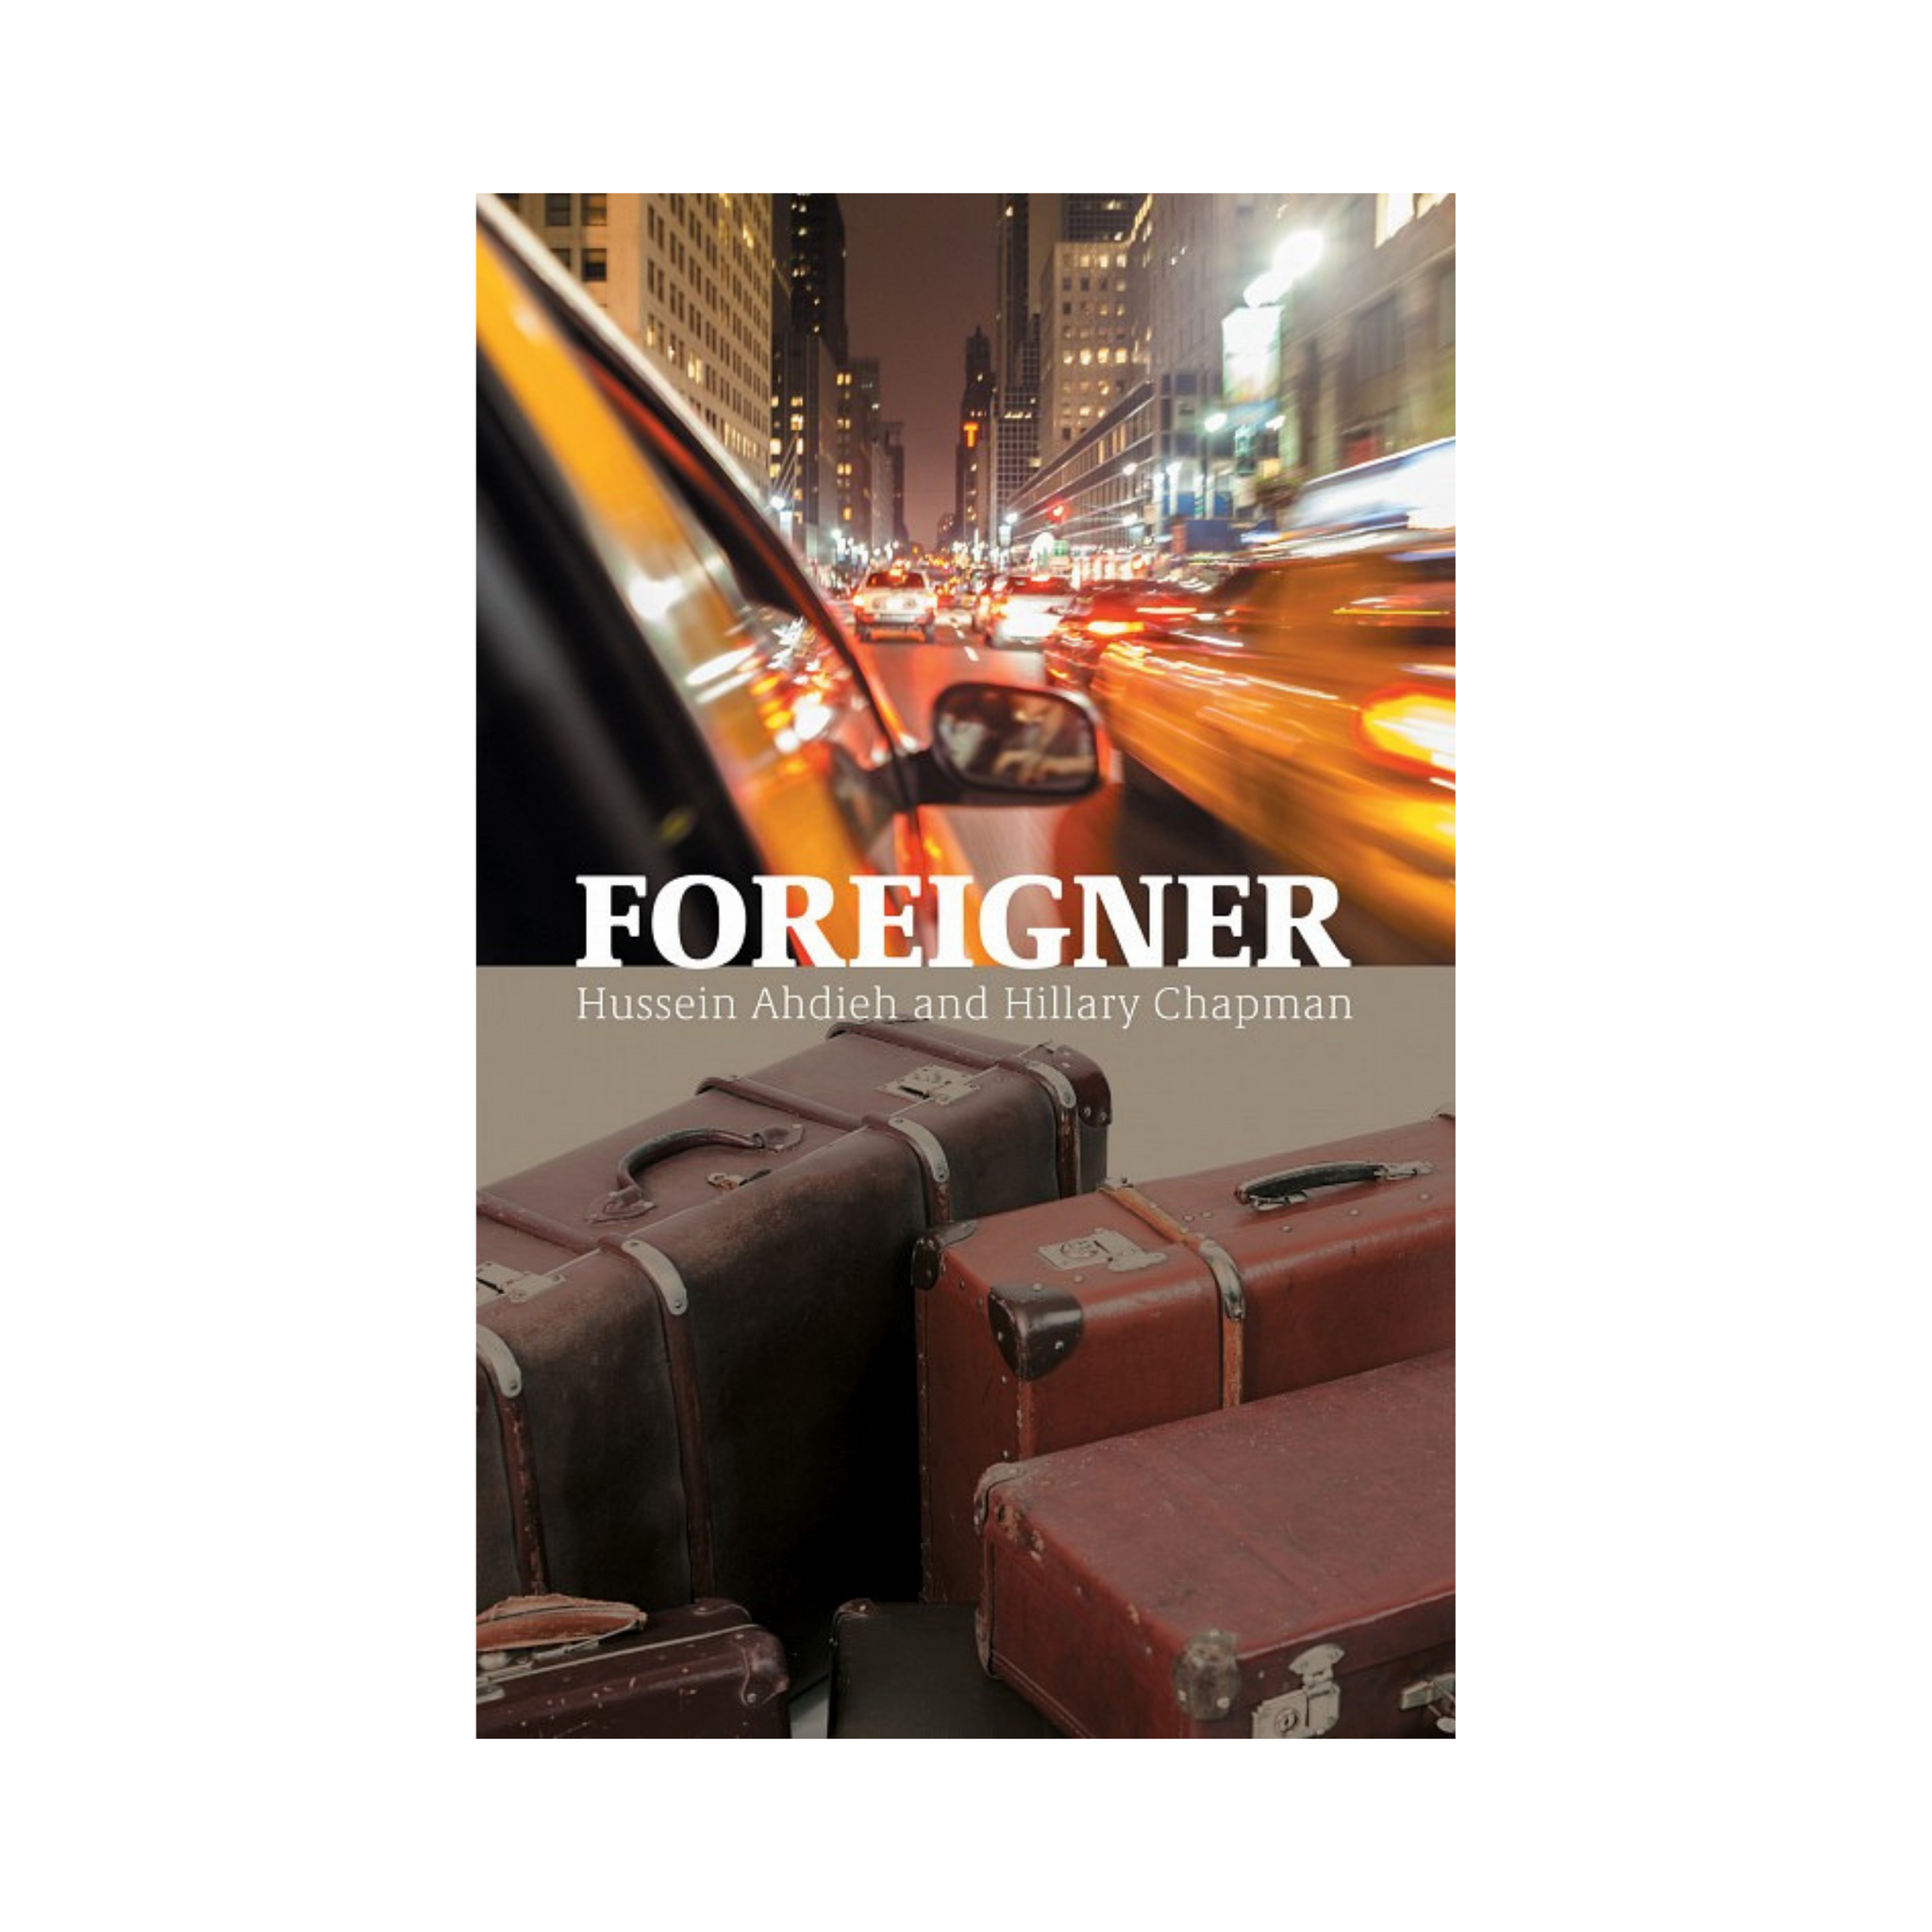 Foreigner - From an Iranian village to New York City, and the lights that led the way